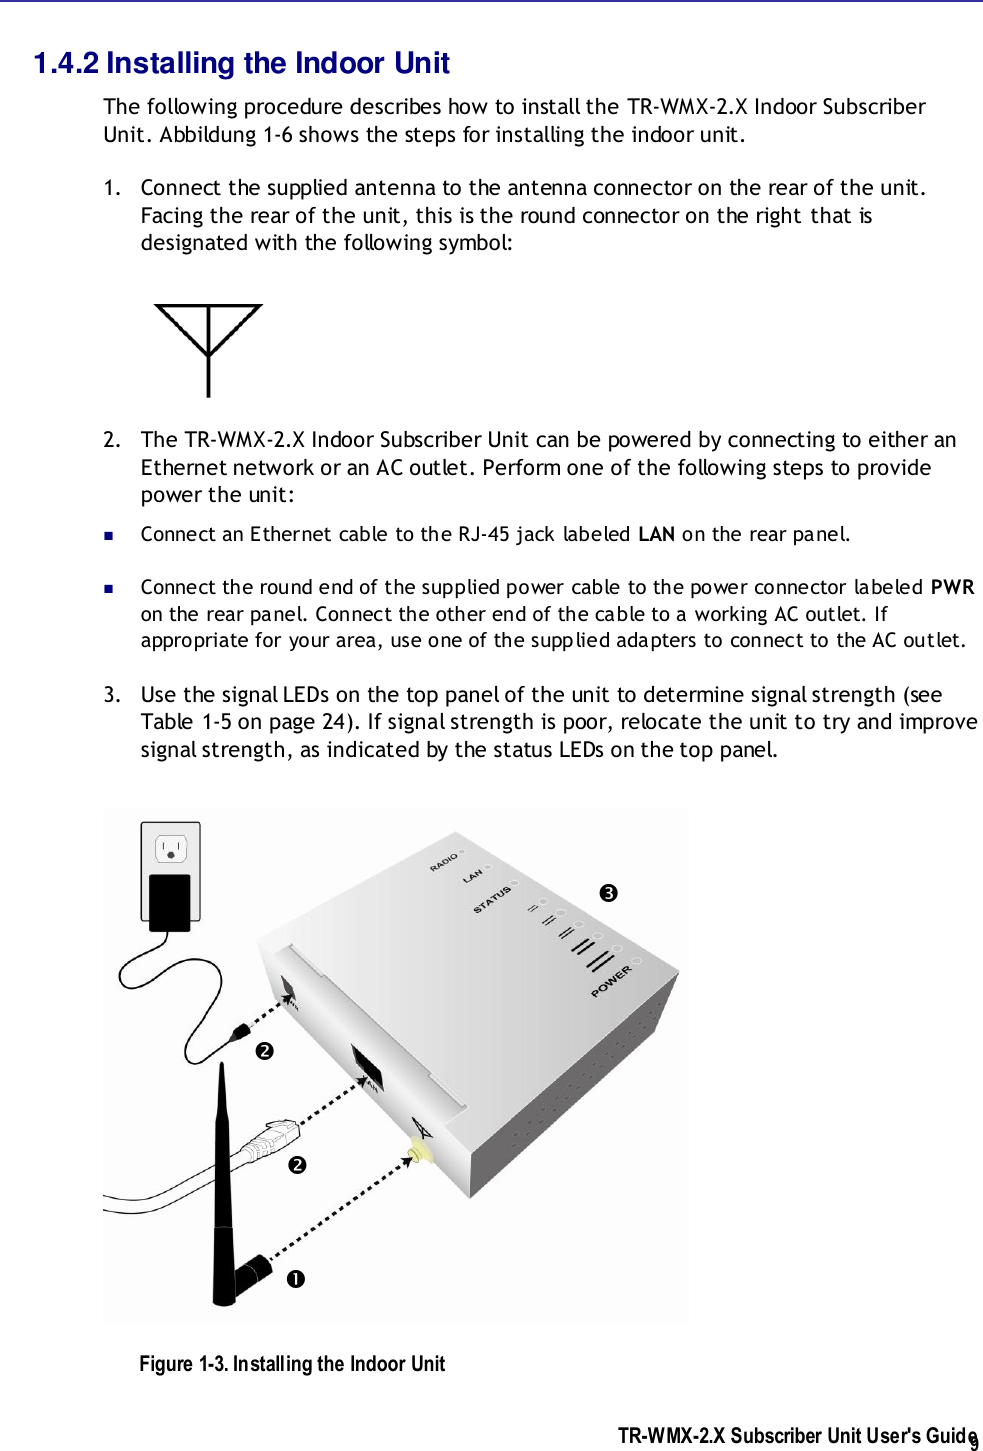  TR-WMX-2.X Subscriber Unit User&apos;s Guide  9 1.4.2 Installing the Indoor Unit The following procedure describes how to install the TR-WMX-2.X Indoor Subscriber Unit. Abbildung 1-6 shows the steps for installing the indoor unit. 1. Connect the supplied antenna to the antenna connector on the rear of the unit. Facing the rear of the unit, this is the round connector on the right that is designated with the following symbol:    2. The TR-WMX-2.X Indoor Subscriber Unit can be powered by connecting to either an Ethernet network or an AC outlet. Perform one of the following steps to provide power the unit:  Connect an Ethernet cable to the RJ-45 jack labeled LAN on the rear panel.  Connect the round end of the supplied power cable to the power connector labeled PWR on the rear panel. Connect the other end of the cable to a working AC outlet. If appropriate for your area, use one of the supplied adapters to connect to the AC outlet. 3. Use the signal LEDs on the top panel of the unit to determine signal strength (see Table 1-5 on page 24). If signal strength is poor, relocate the unit to try and improve signal strength, as indicated by the status LEDs on the top panel.   Figure 1-3. Installing the Indoor Unit     